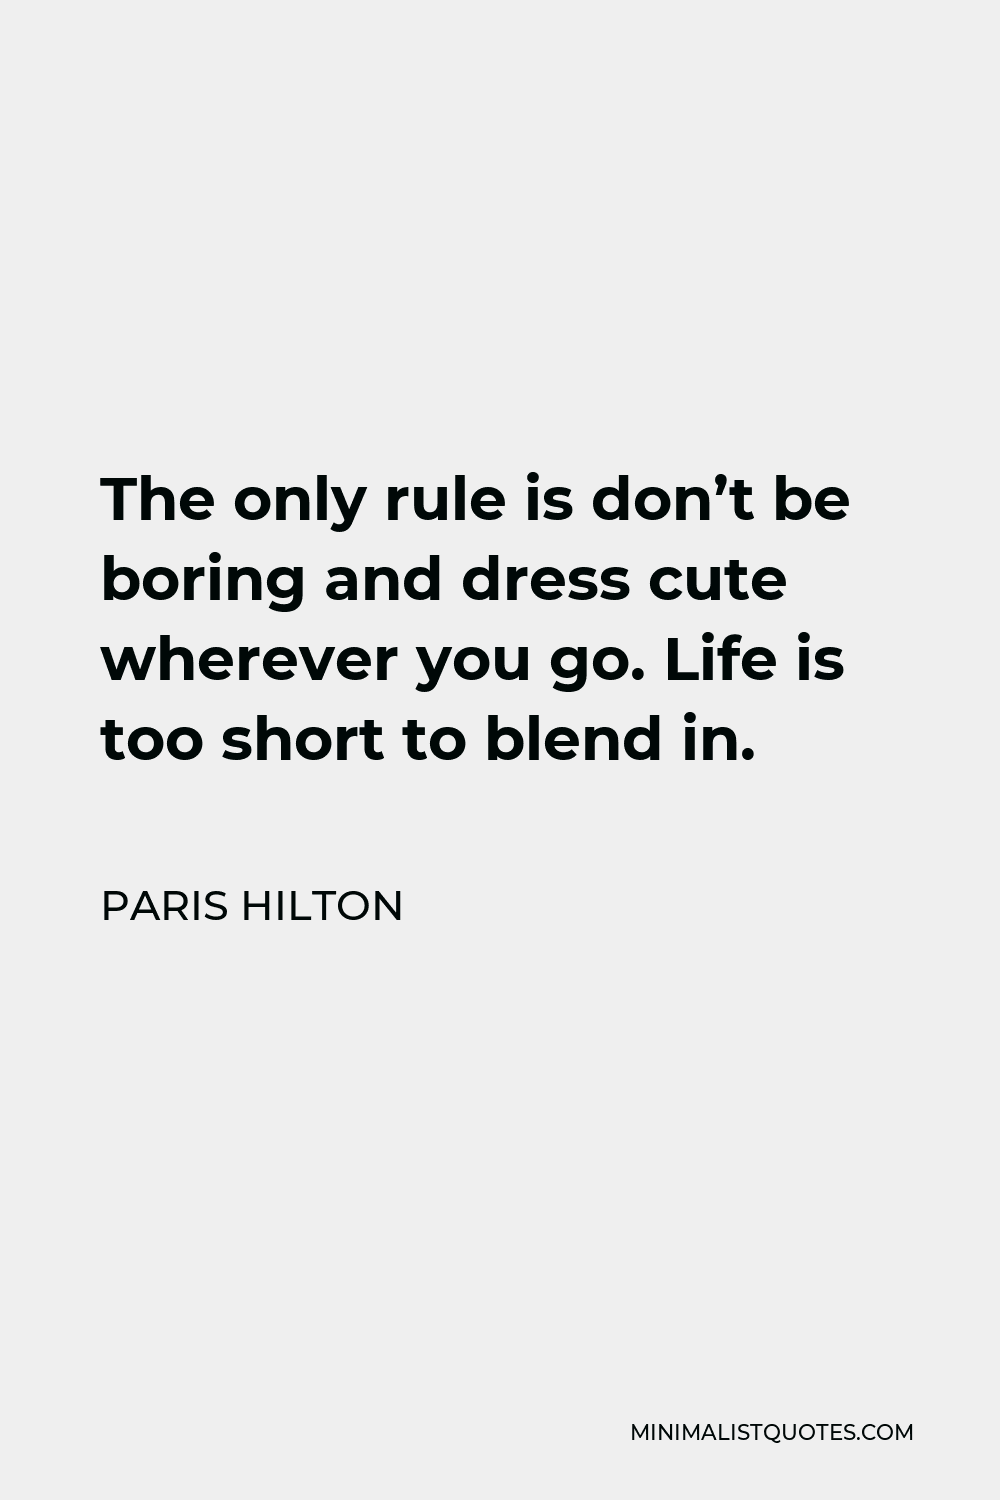 Paris Hilton Quote - The only rule is don’t be boring and dress cute wherever you go. Life is too short to blend in.